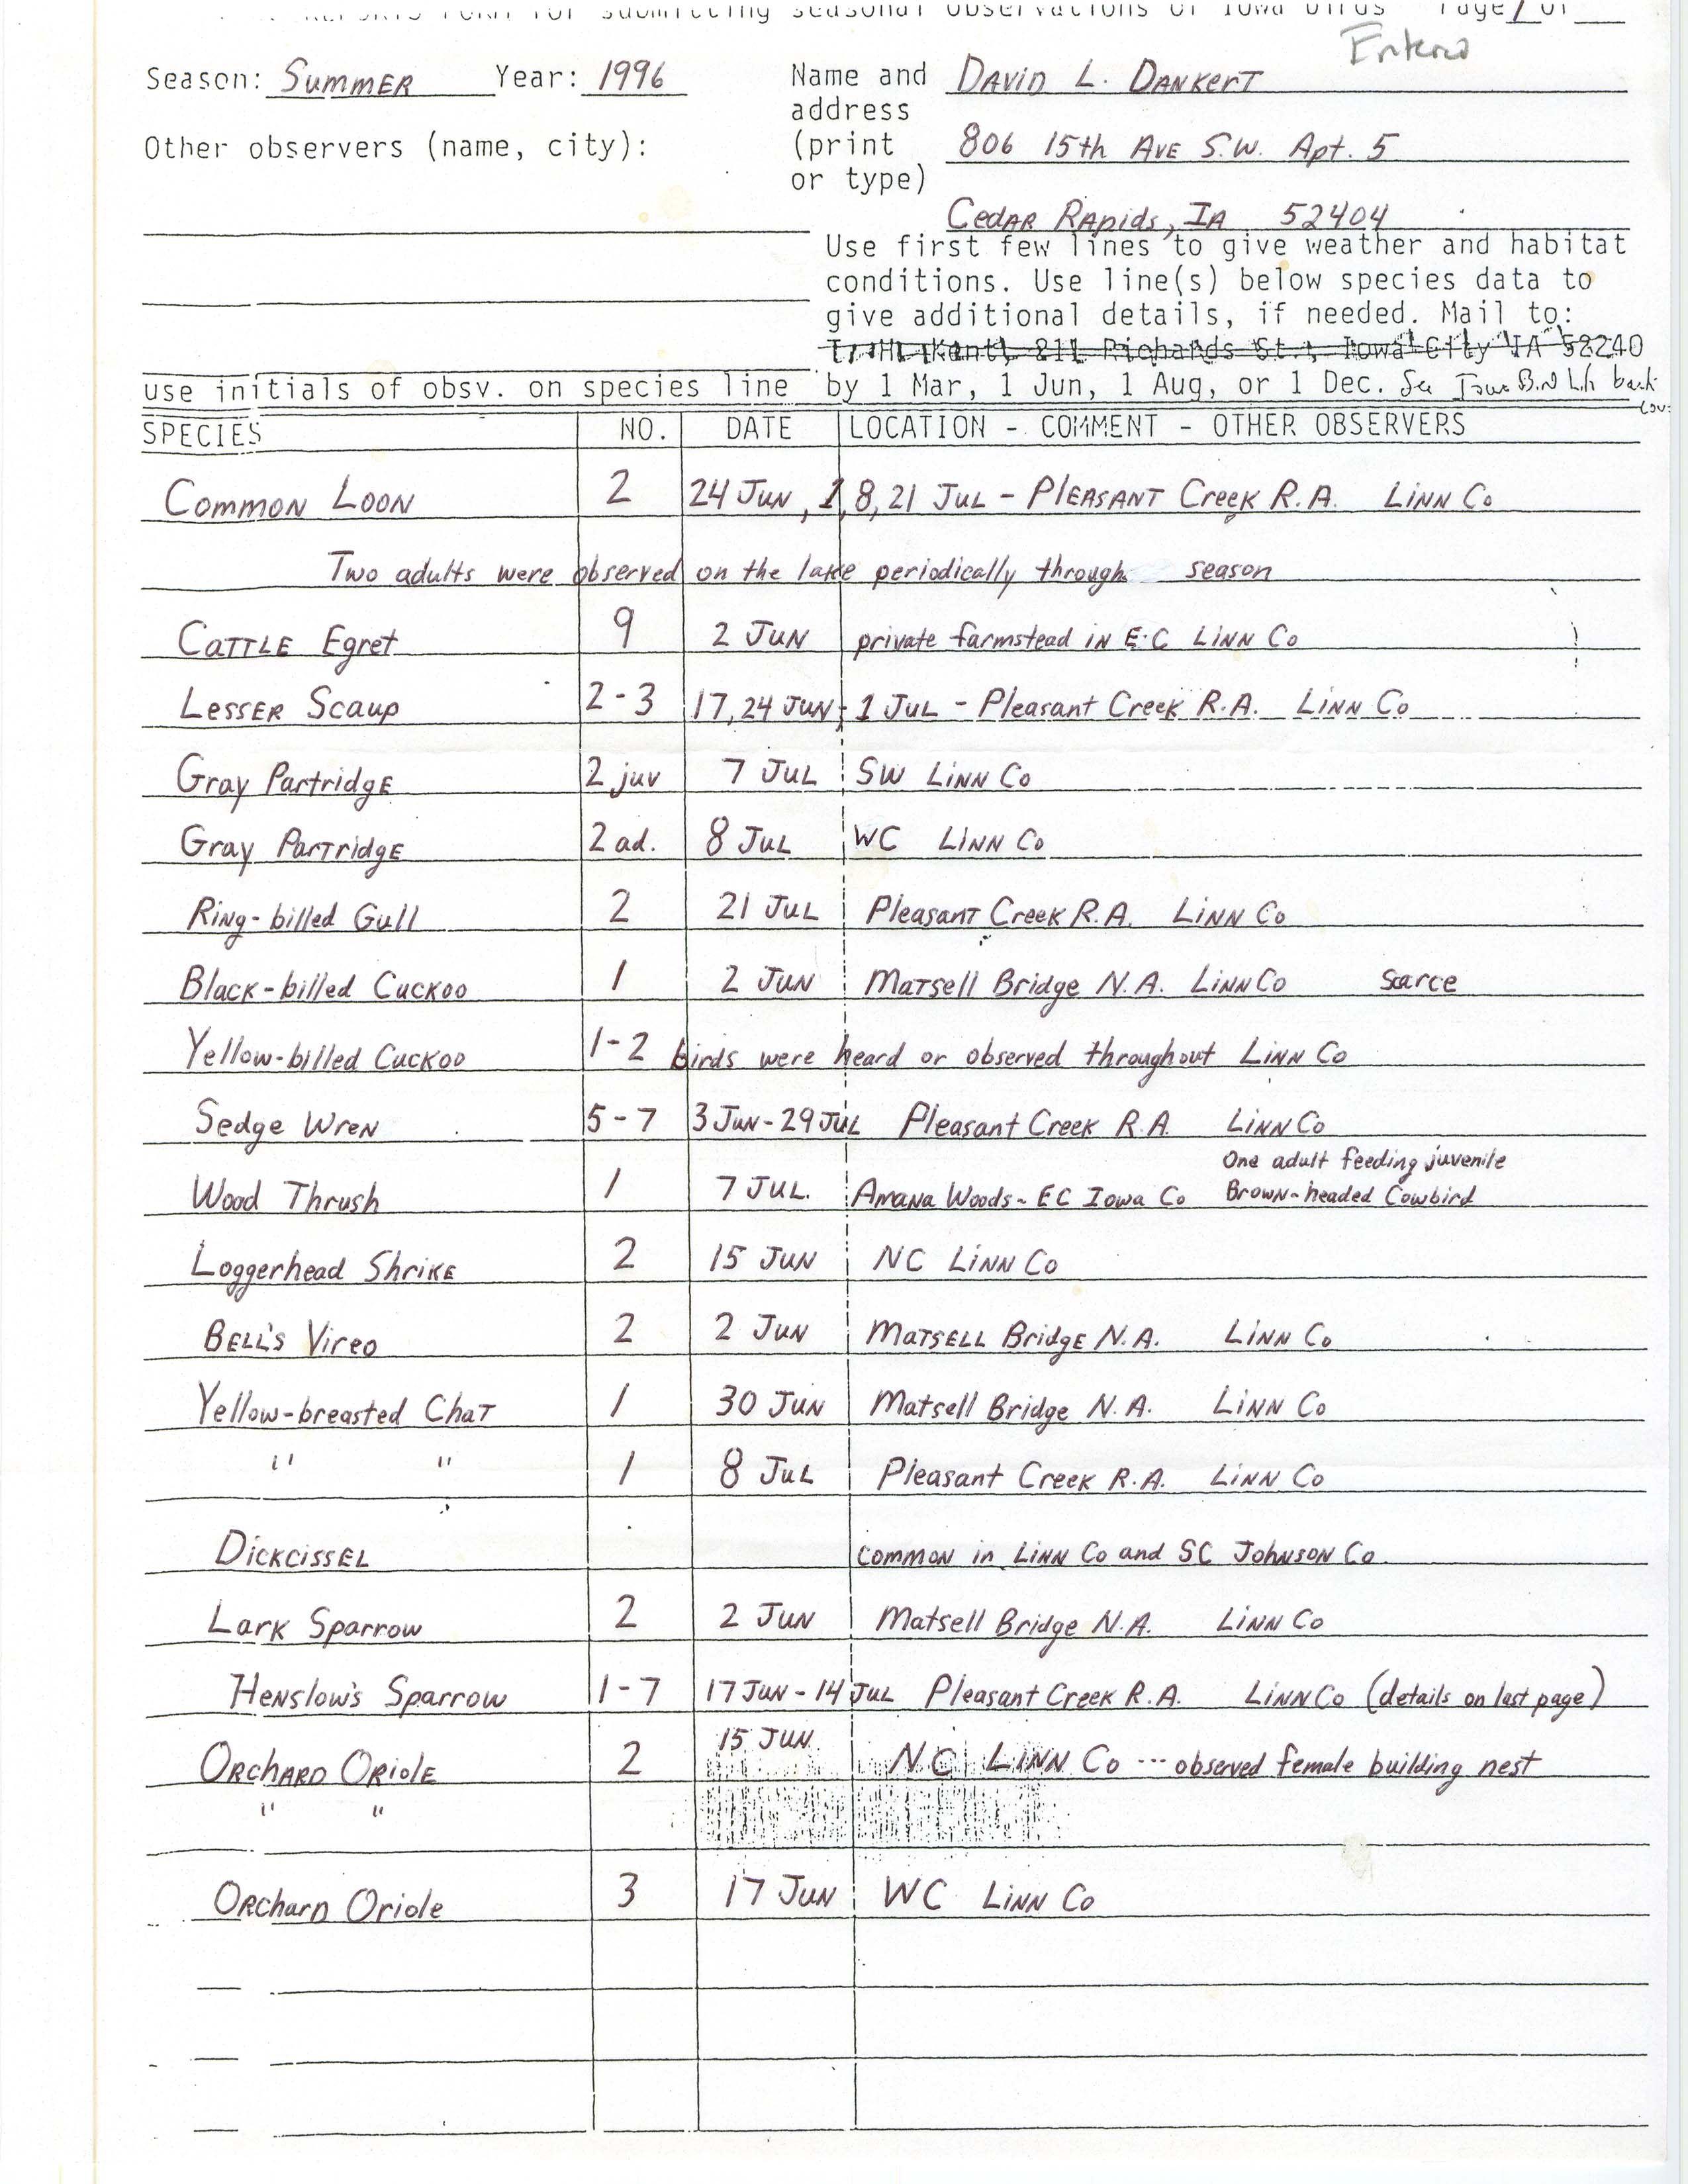 Field reports form for submitting seasonal observations of Iowa birds, David L. Dankert, summer 1996